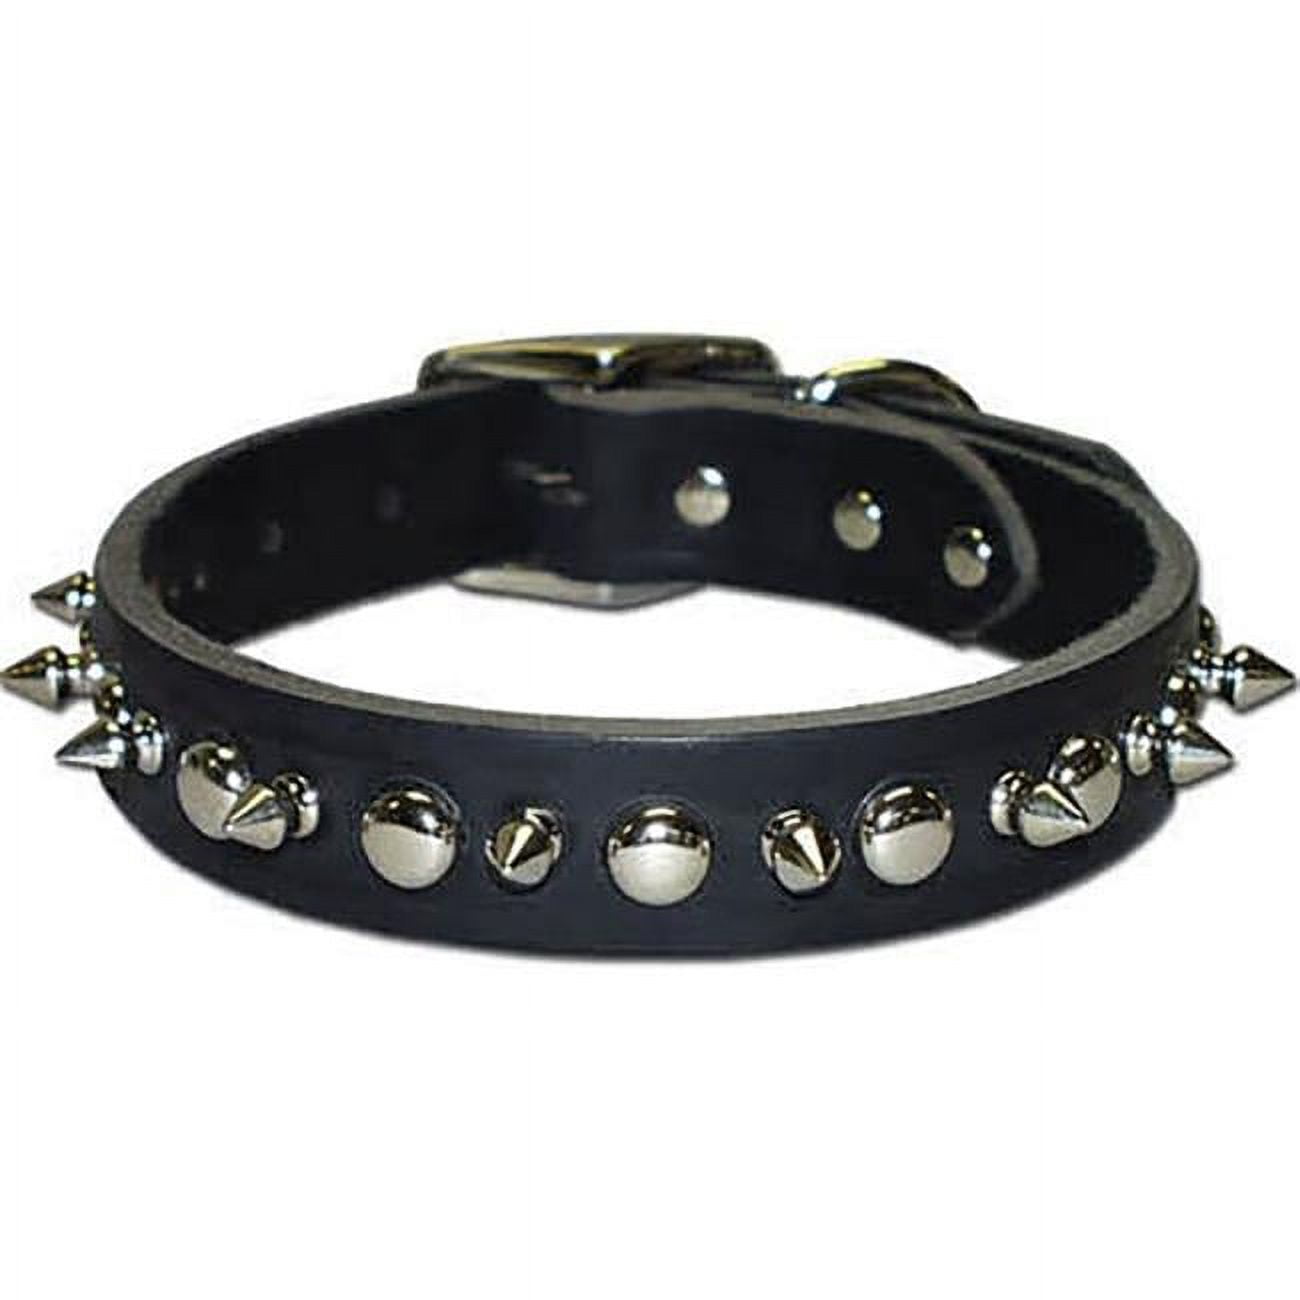 Picture of Leather Brothers 102LKS-BK16 0.75 x 16 in. Latigo Leather 1 Ply Spiked Dog Collar, Black